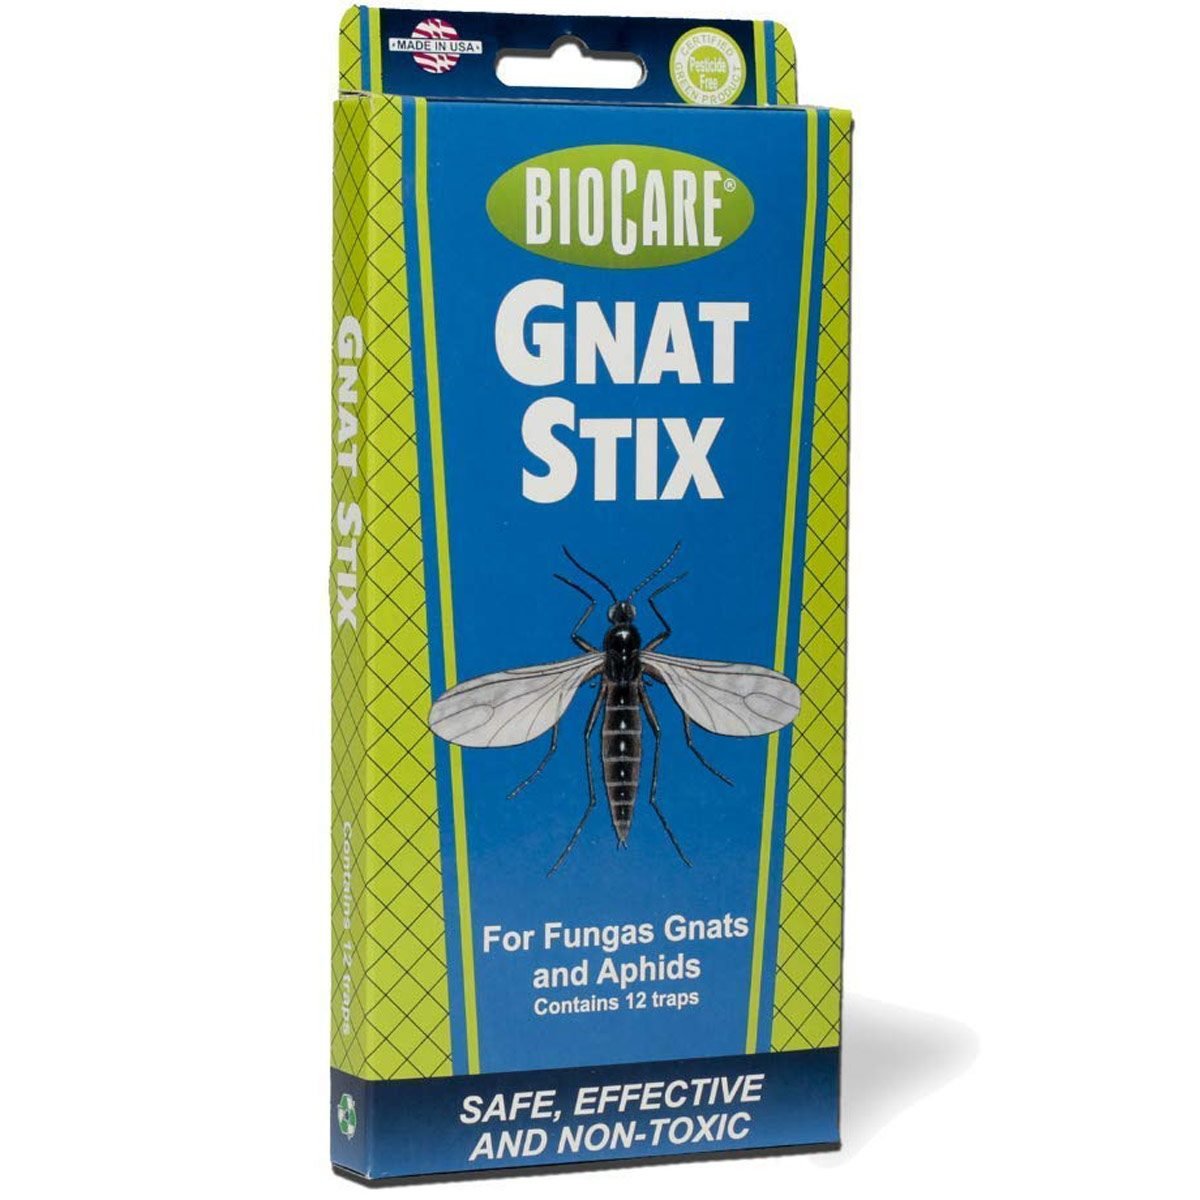 The Ultimate DIY Gnat Trap - Today's Homeowner